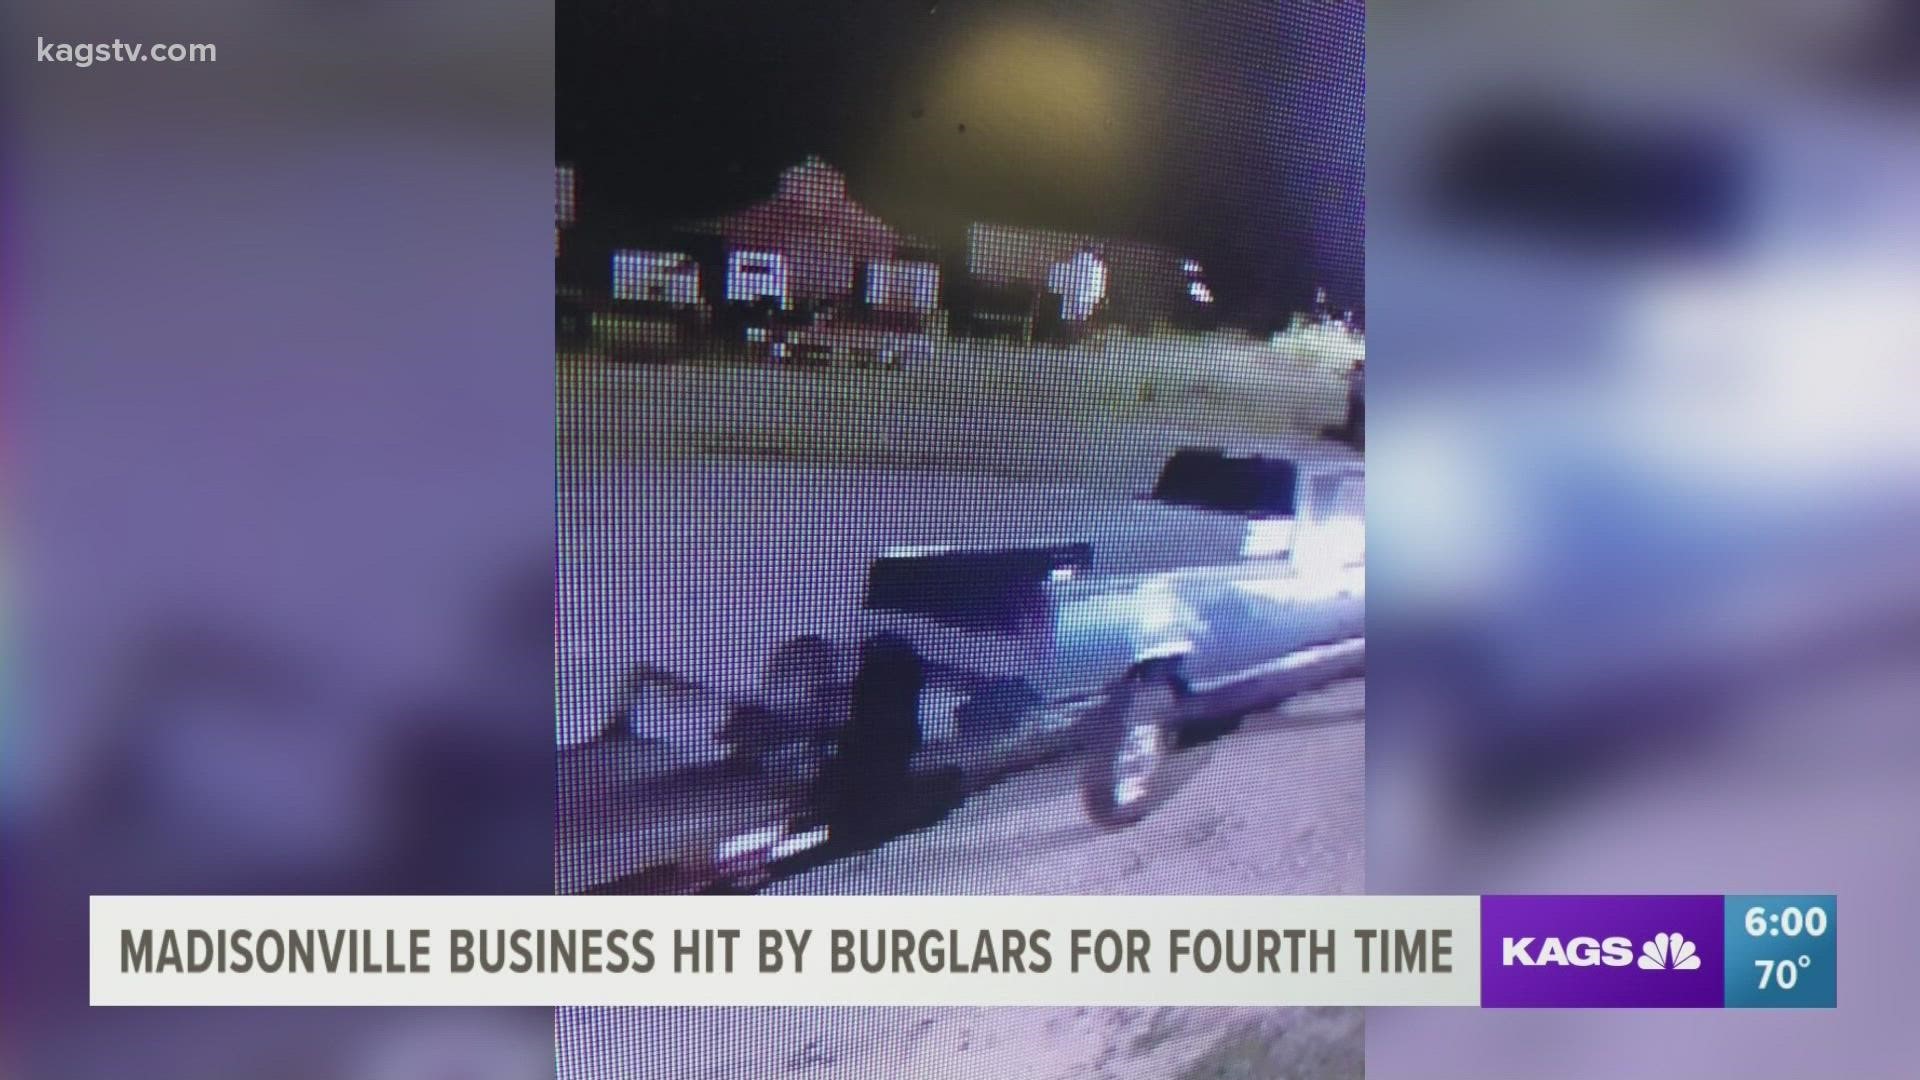 The burglaries so far have cost Blue Roaster trailer over $30,000 dollar